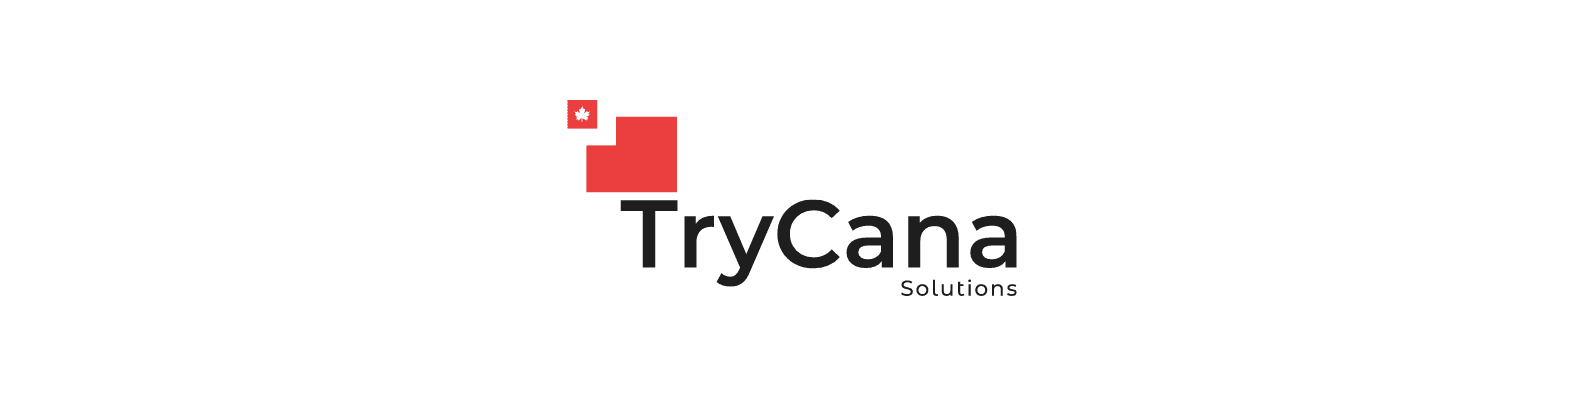 Product About | TryCana Solutions image